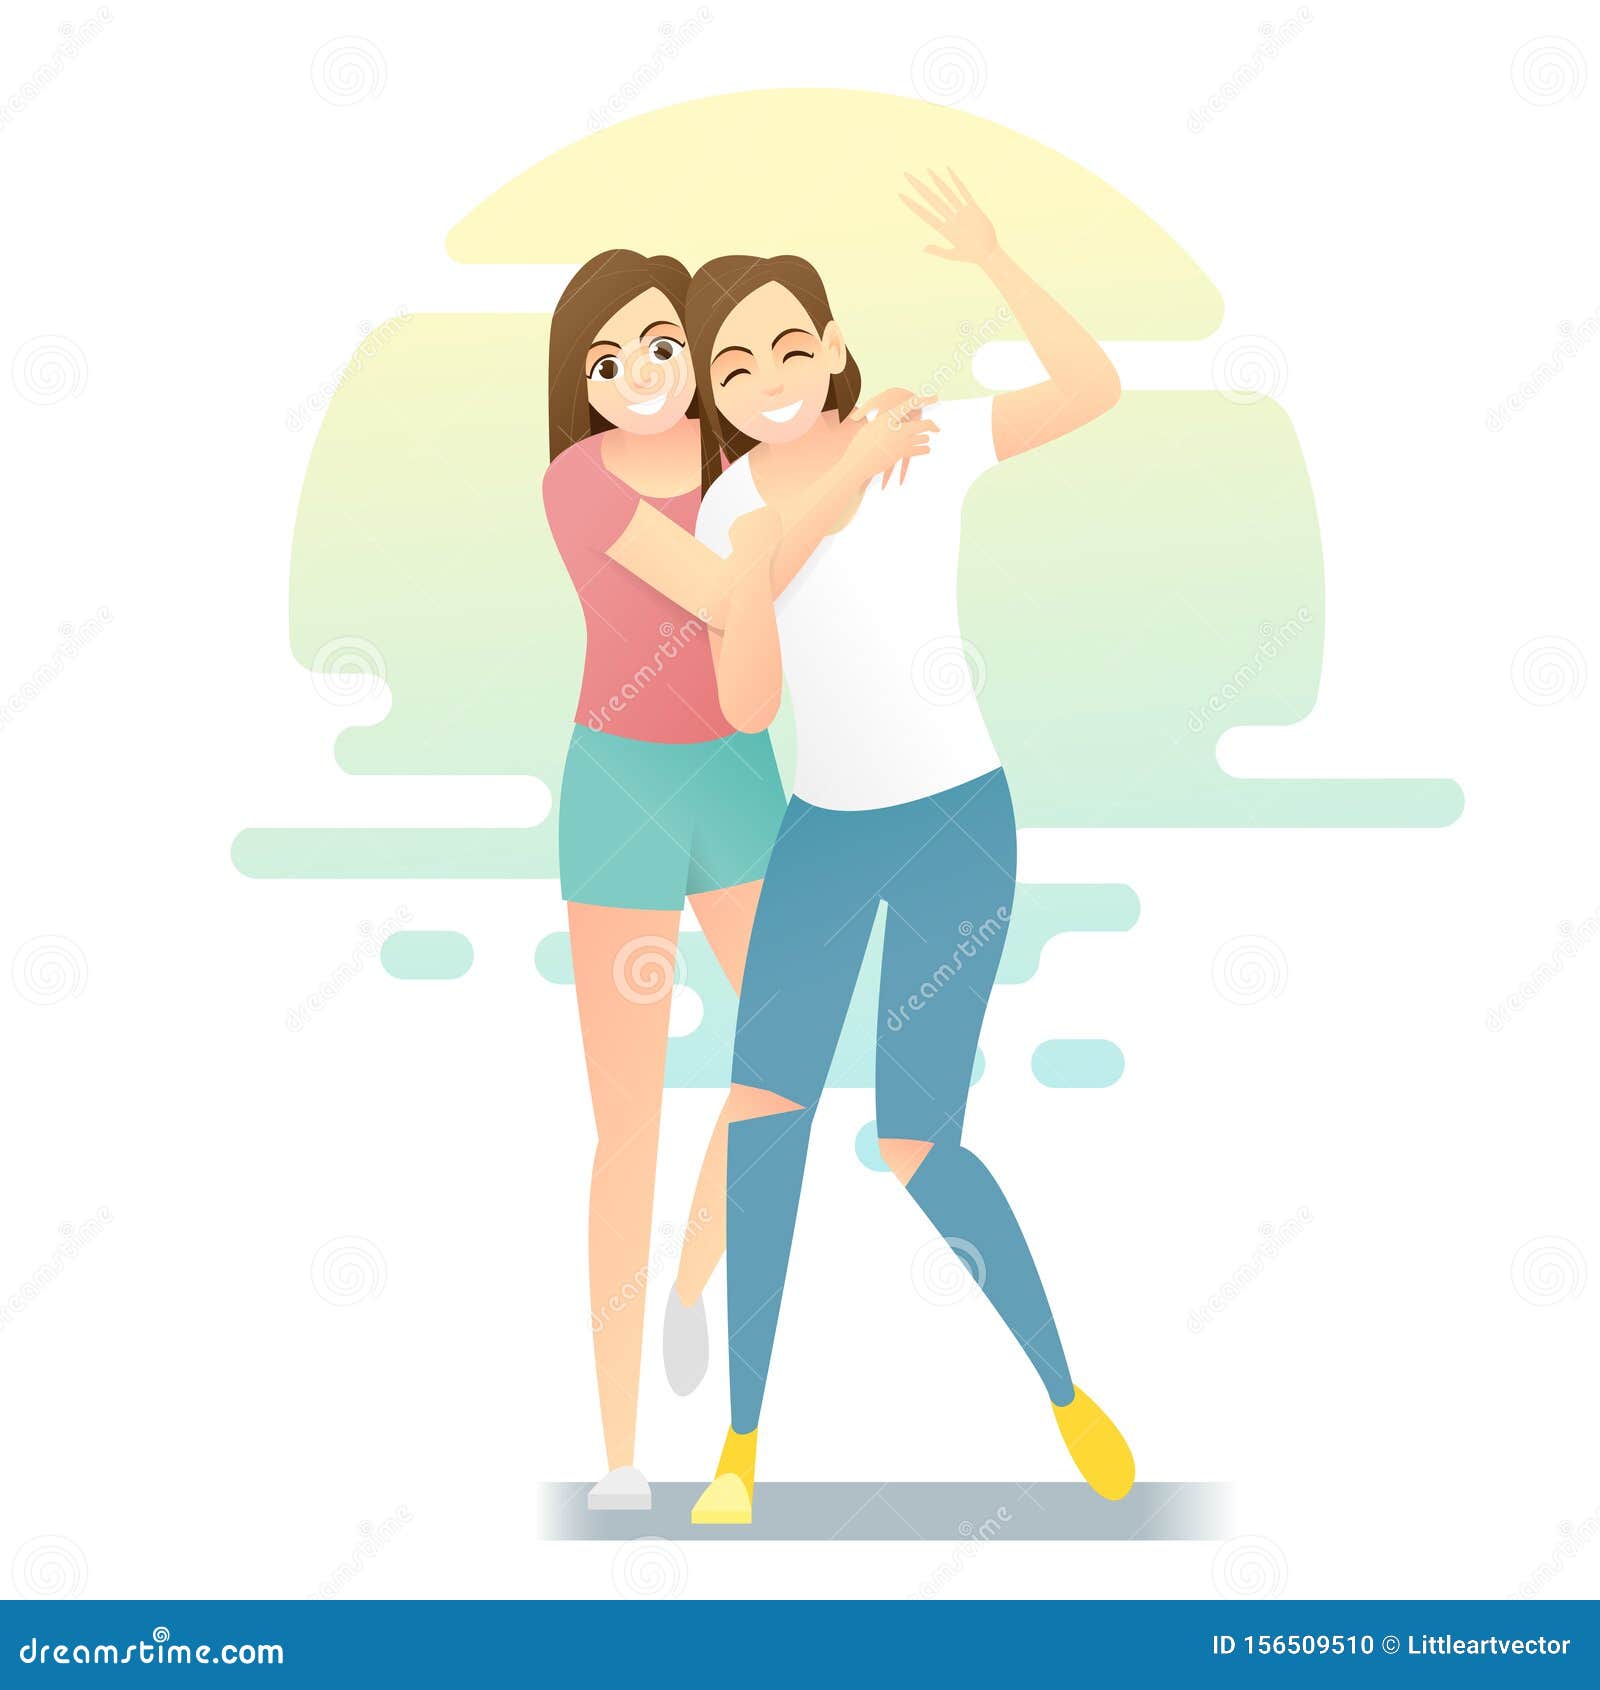 Friendship Concept Background With Two Young Women Having Fun Together